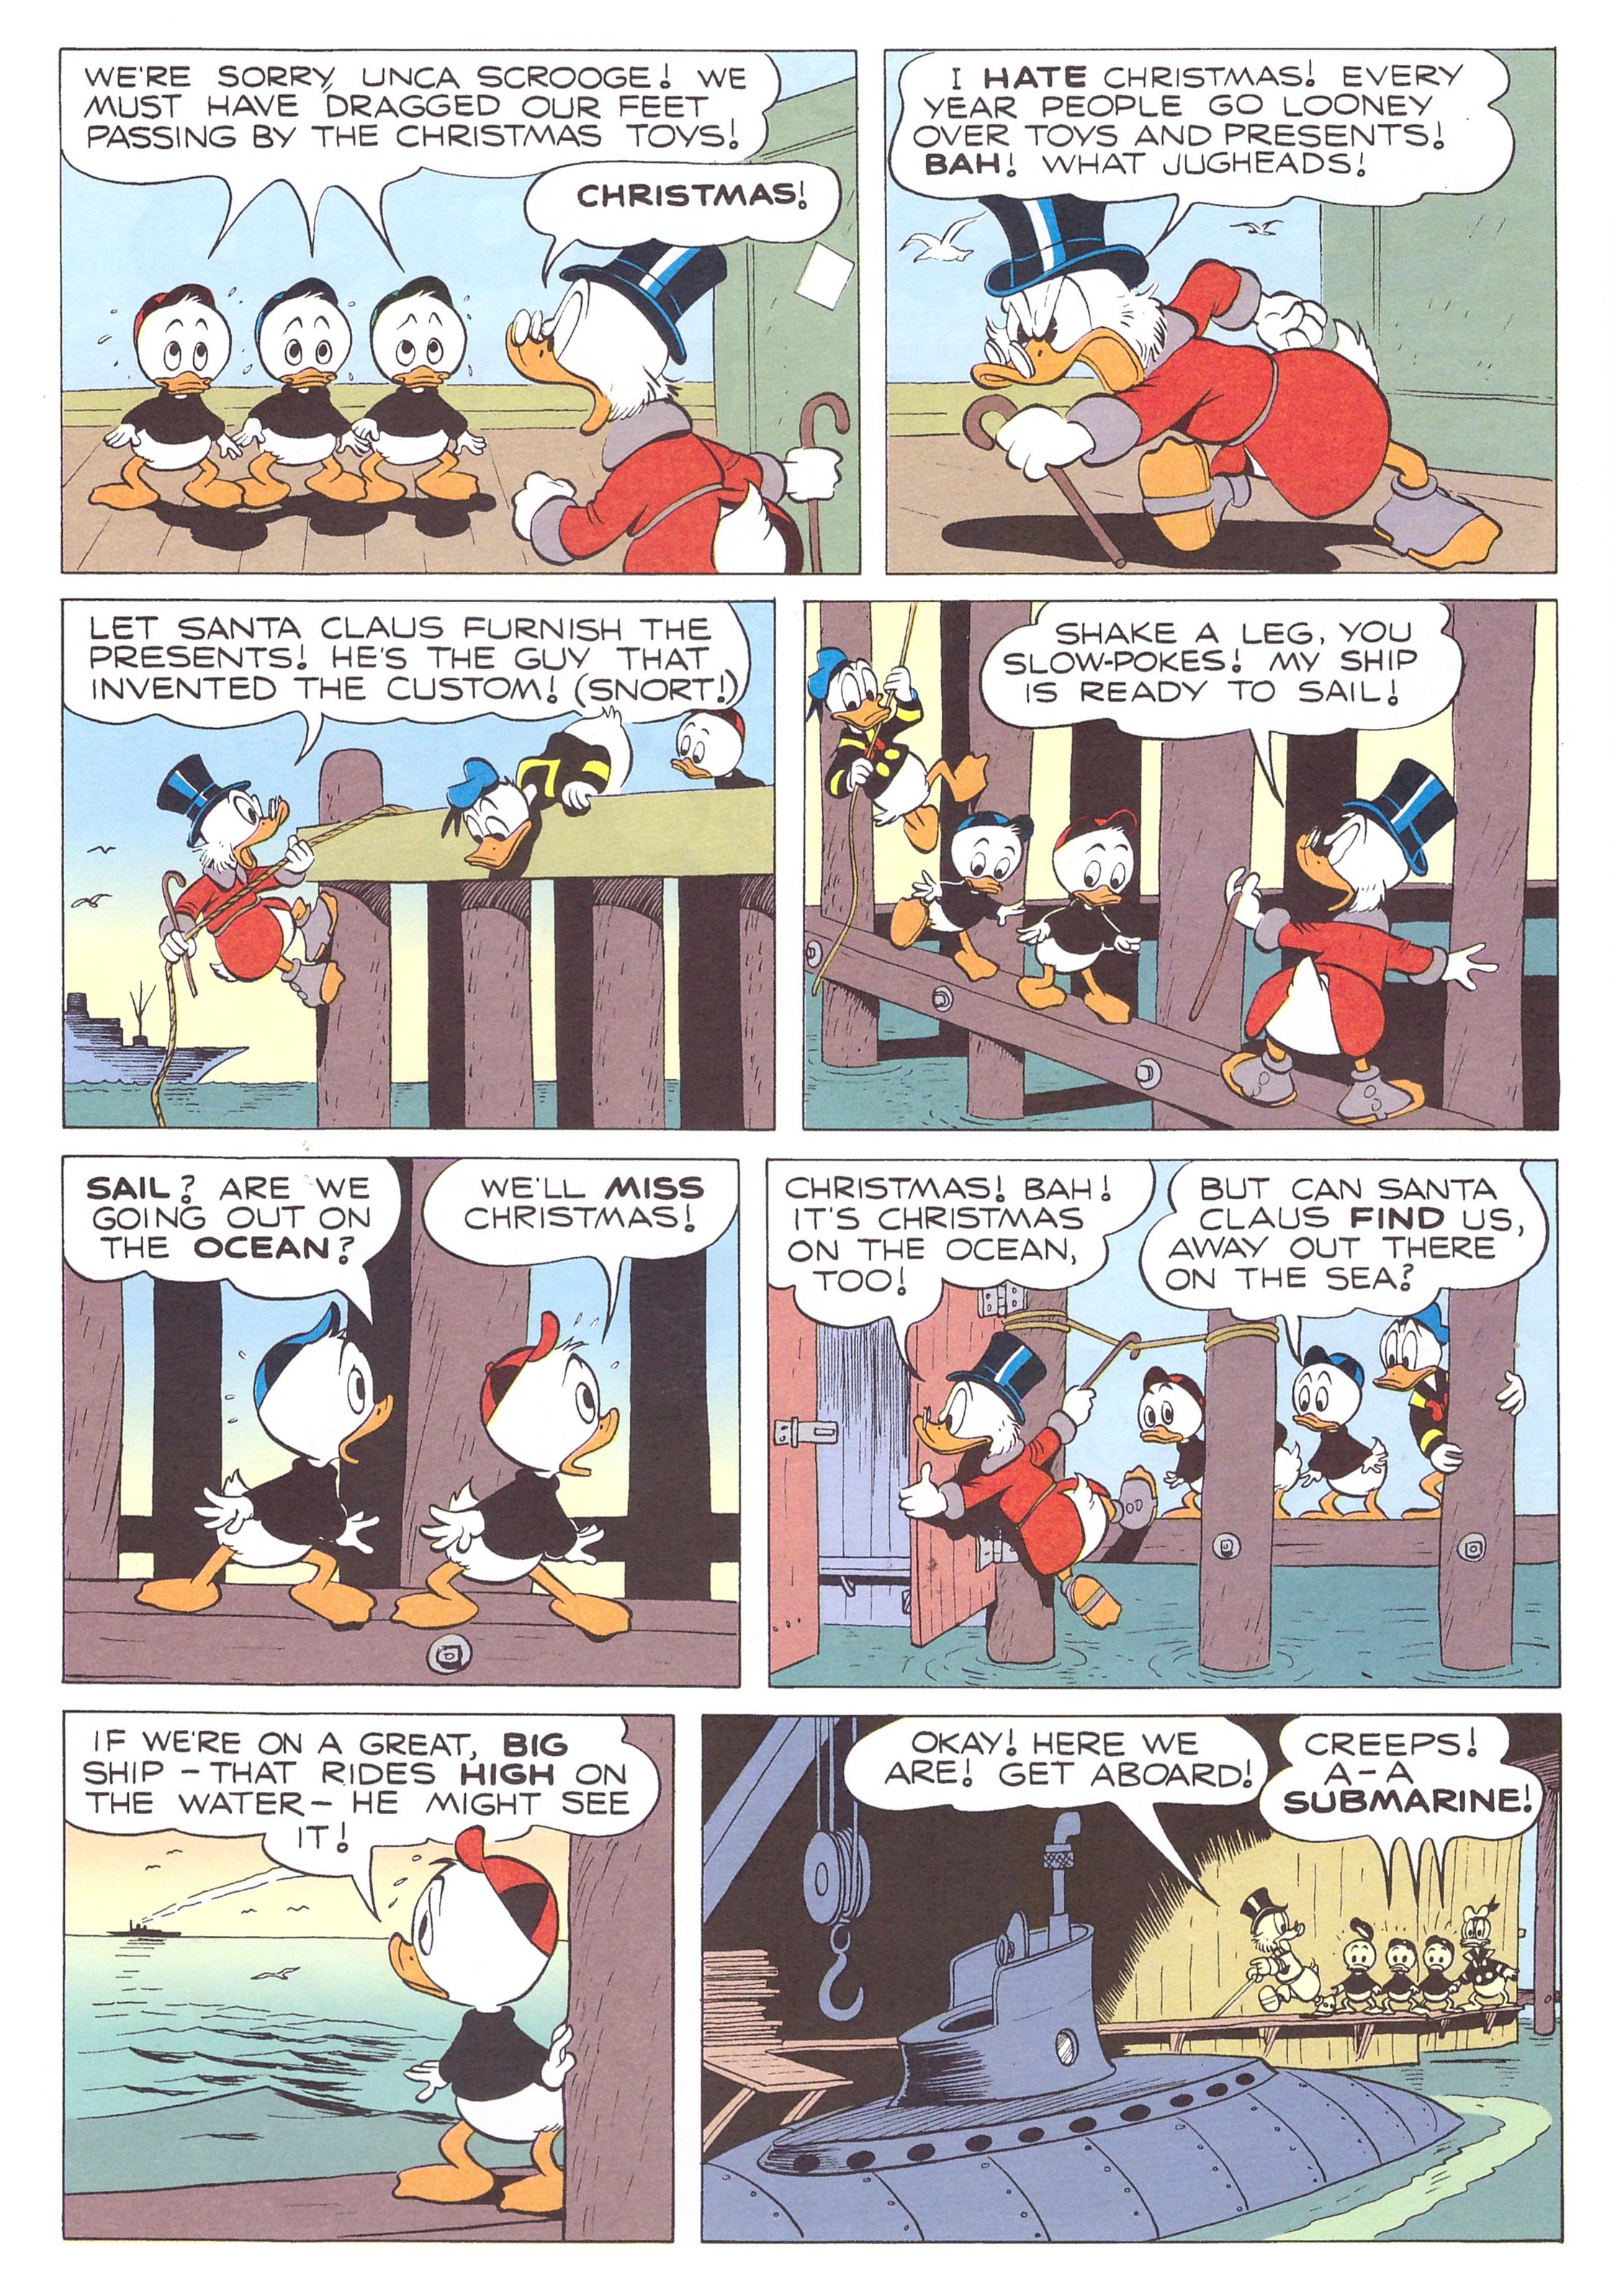 Walt Disney's Comcs and Stories by Carl Barks 27 review